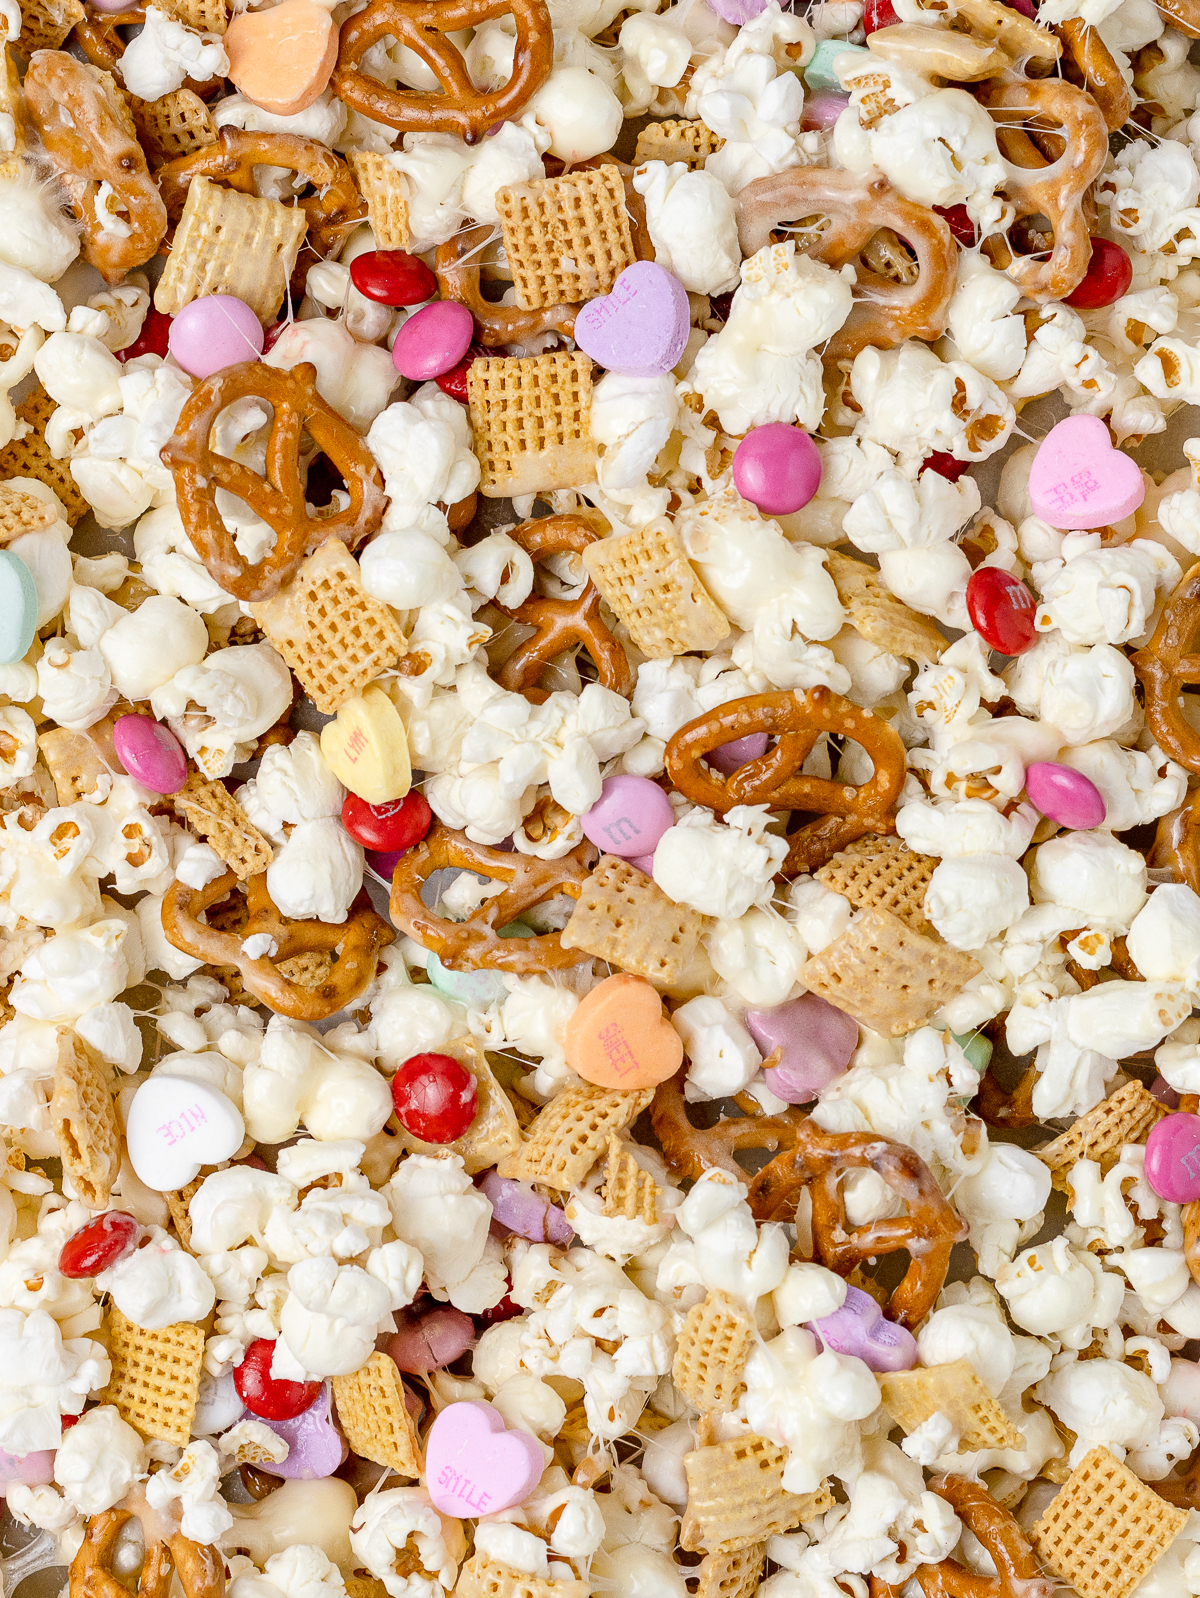 Close up of the marshmallow coated popcorn snack mix.